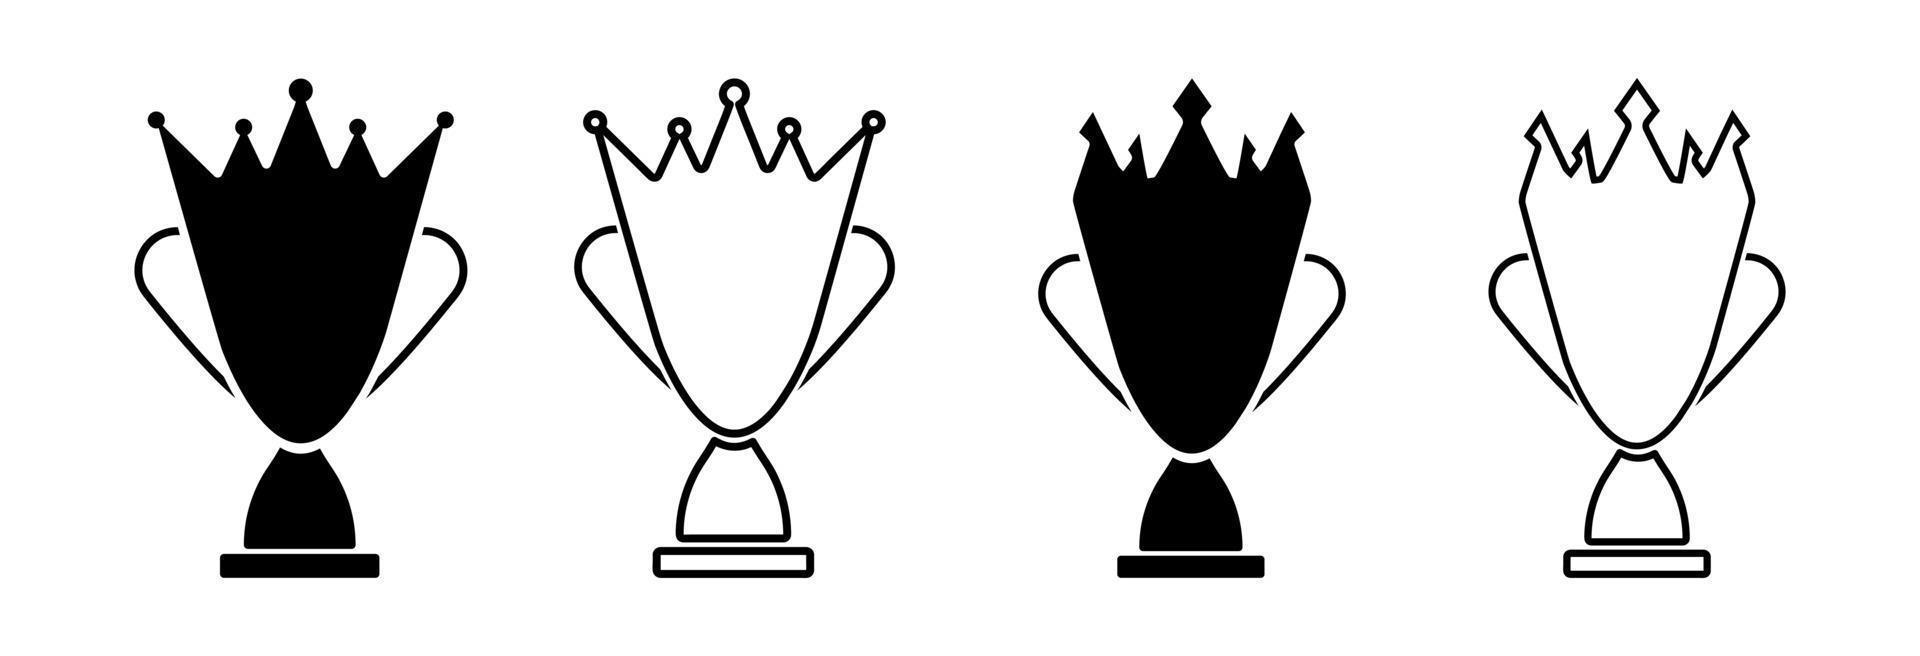 Crown trophy icon set design. Royal crown cup contest winner, number one creative symbol concept. vector